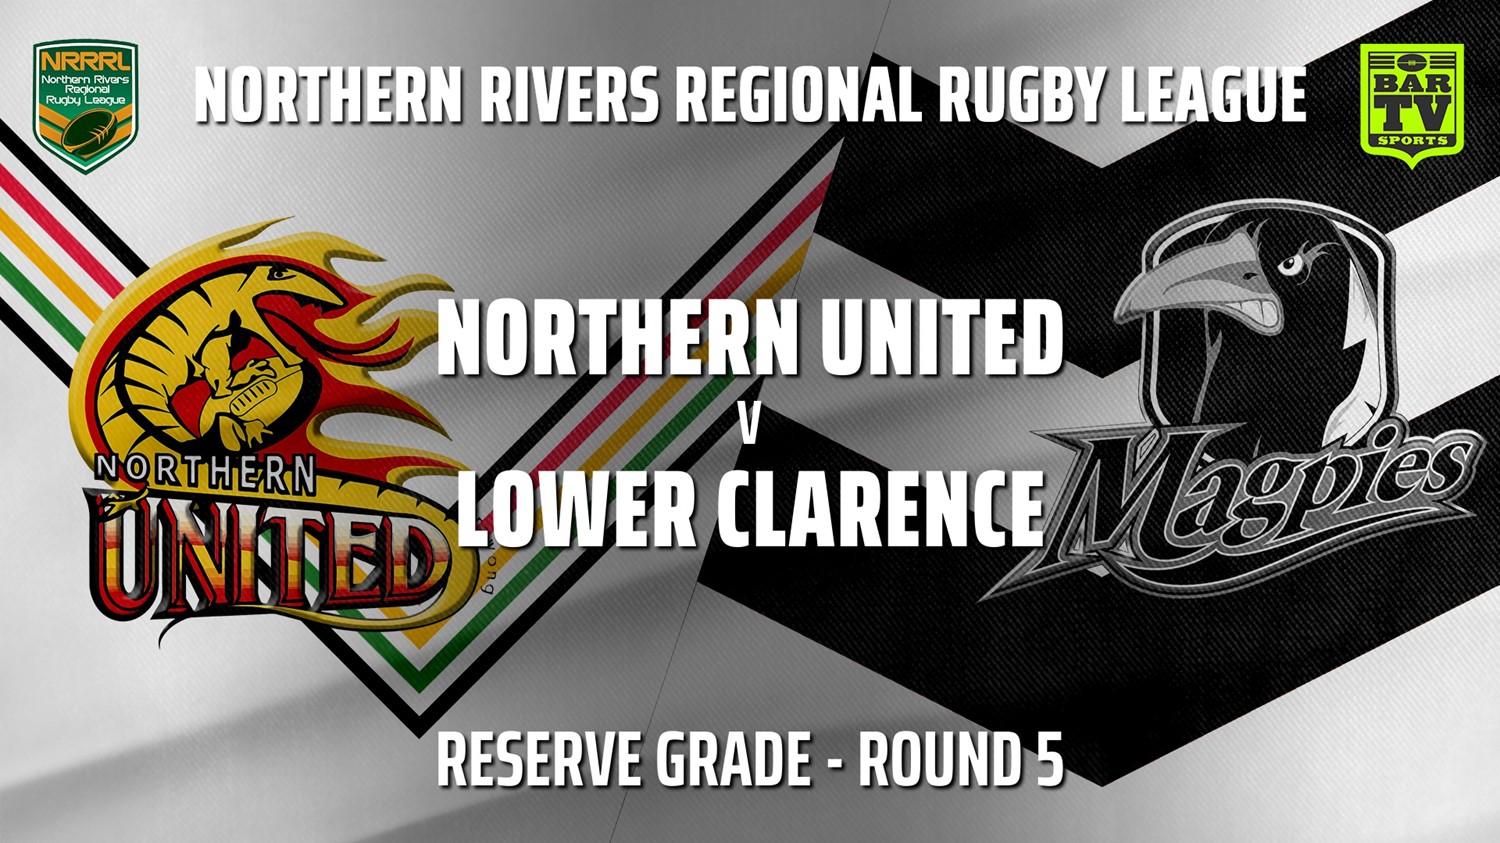 210530-NRRRL Round 5 - Reserve Grade - Northern United v Lower Clarence Magpies Slate Image